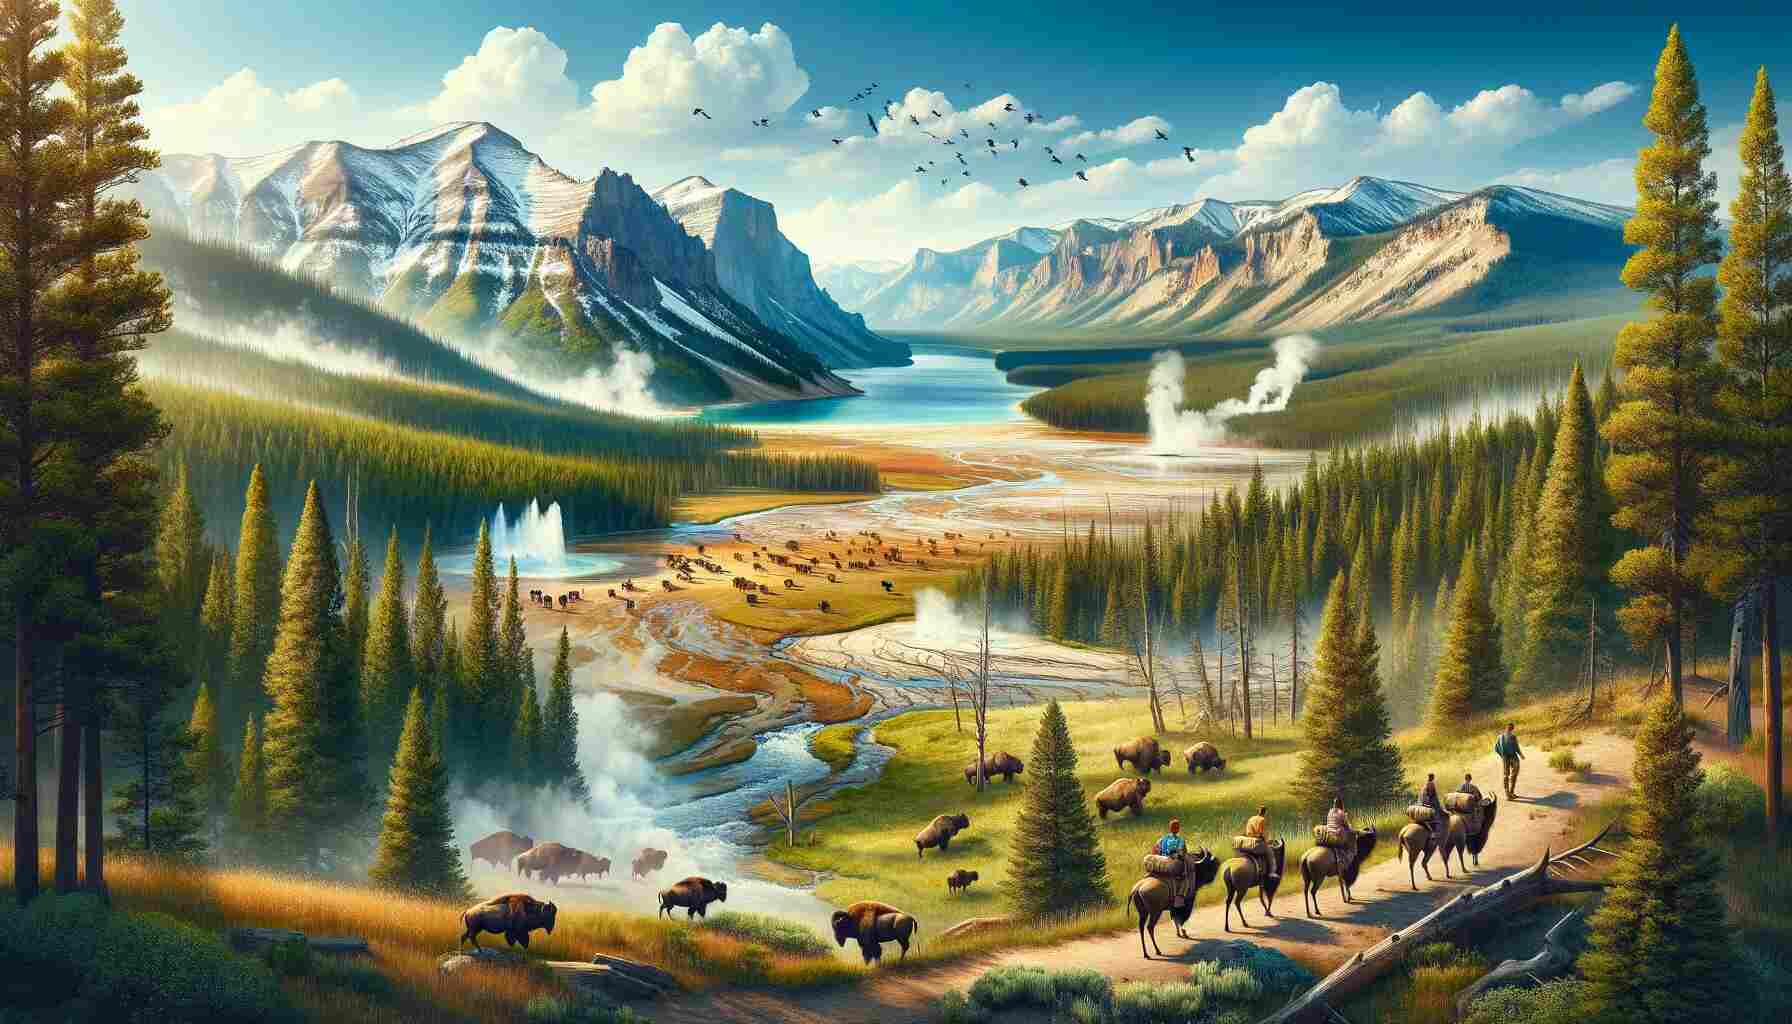 Here is the featured image for the article Exploring Yellowstone: The Best Day Hikes to Witness Wildlife Wonders. Panoramic view of Yellowstone National Park showcasing its diverse wildlife and geothermal features. The scene includes bison, elk, and birds in their natural habitat, with geysers and hot springs scattered throughout. Lush forests and rugged mountains create a majestic backdrop under a clear blue sky with wispy clouds. In the foreground, a group of hikers equipped with backpacks are seen on a trail, immersed in the beauty and adventure of Yellowstone's wilderness